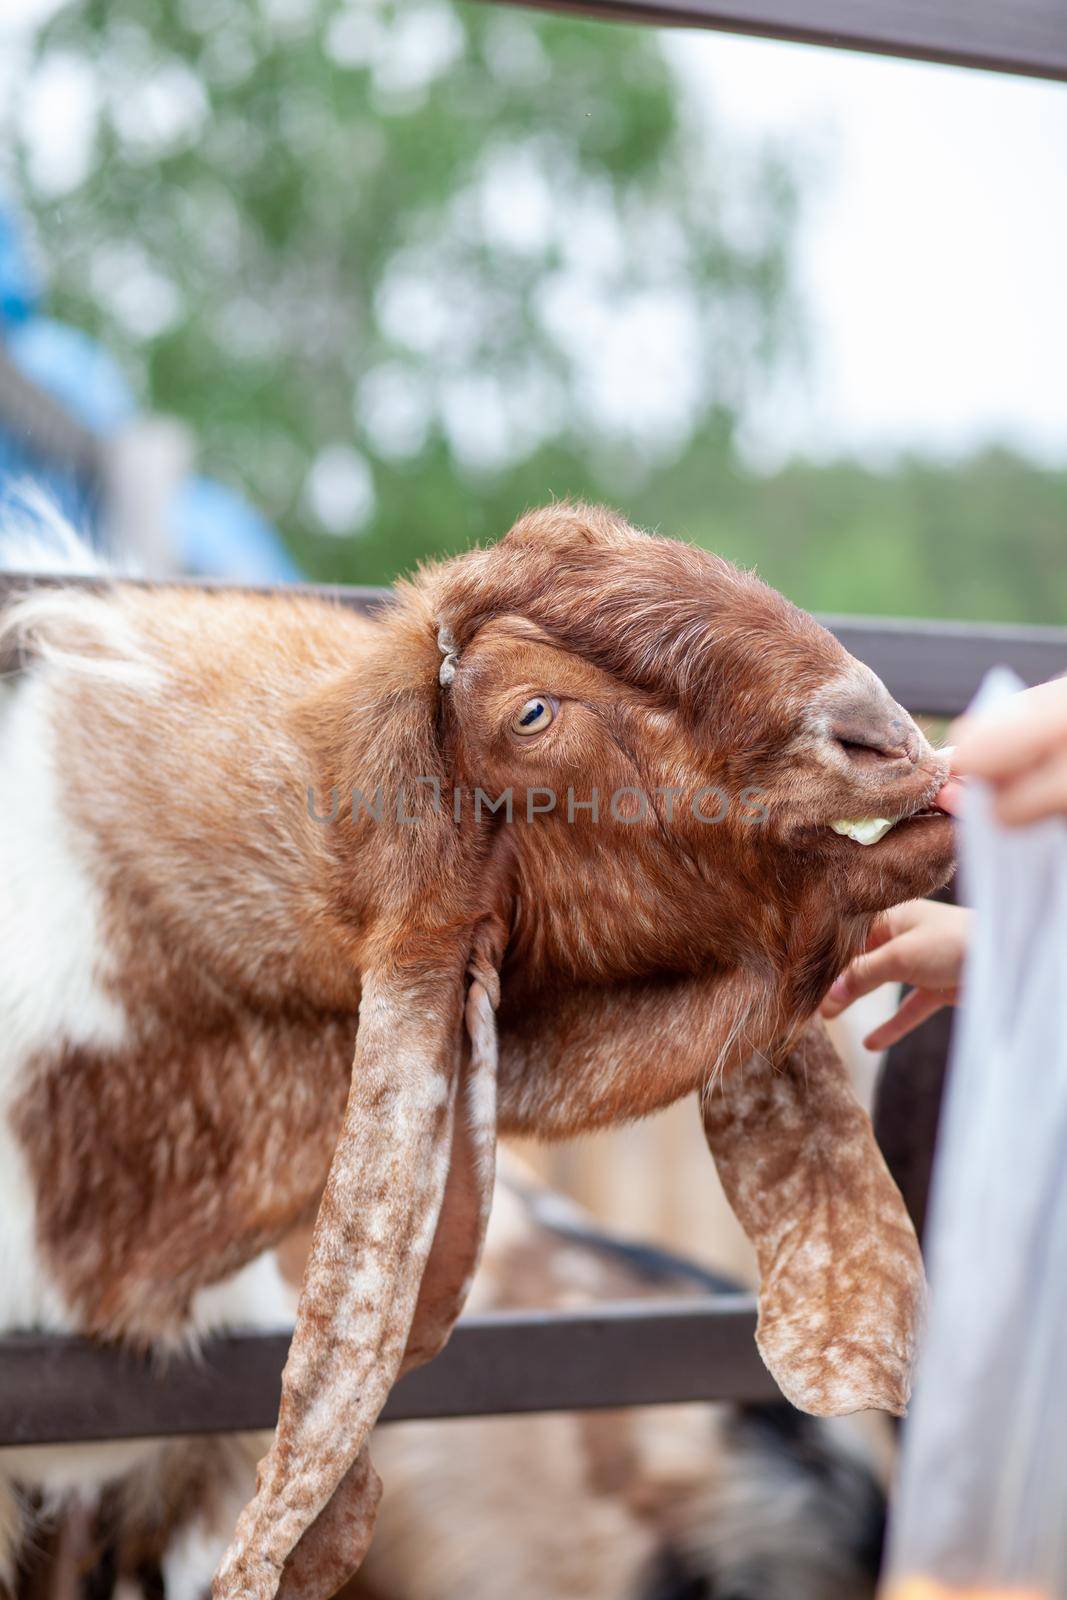 A brown goat with long ears looks over the fence and people feed it. by AnatoliiFoto